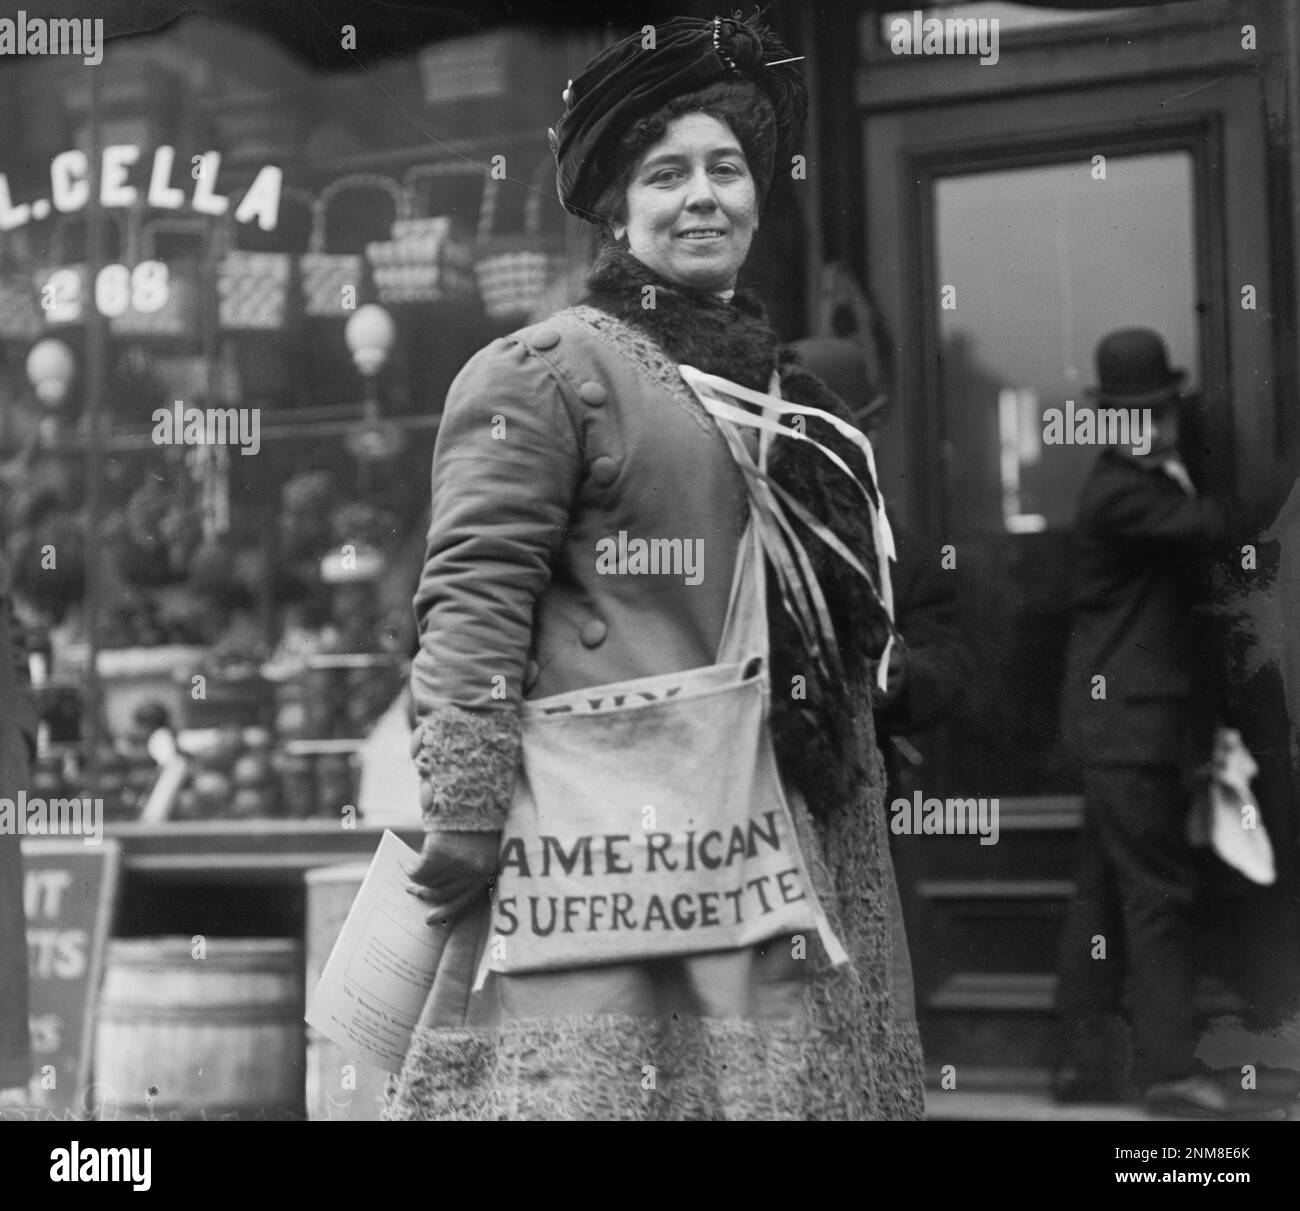 Mrs H. Riordan American Suffragette distributing leaflets in New York - c1910 Stock Photo